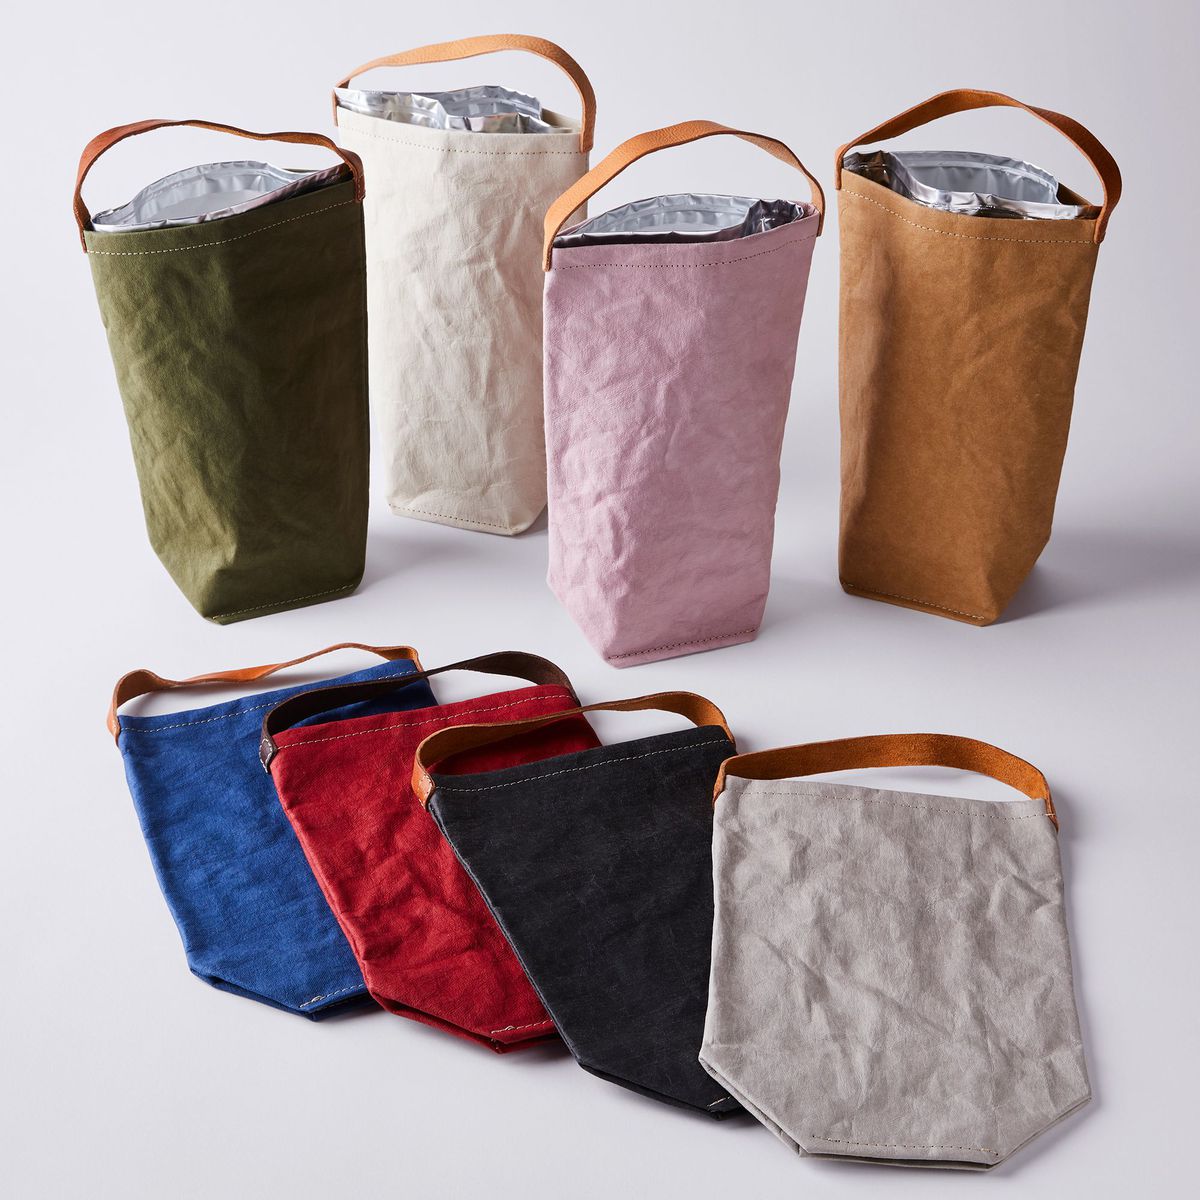 An assortment of combination wine bags and coolers in various colors